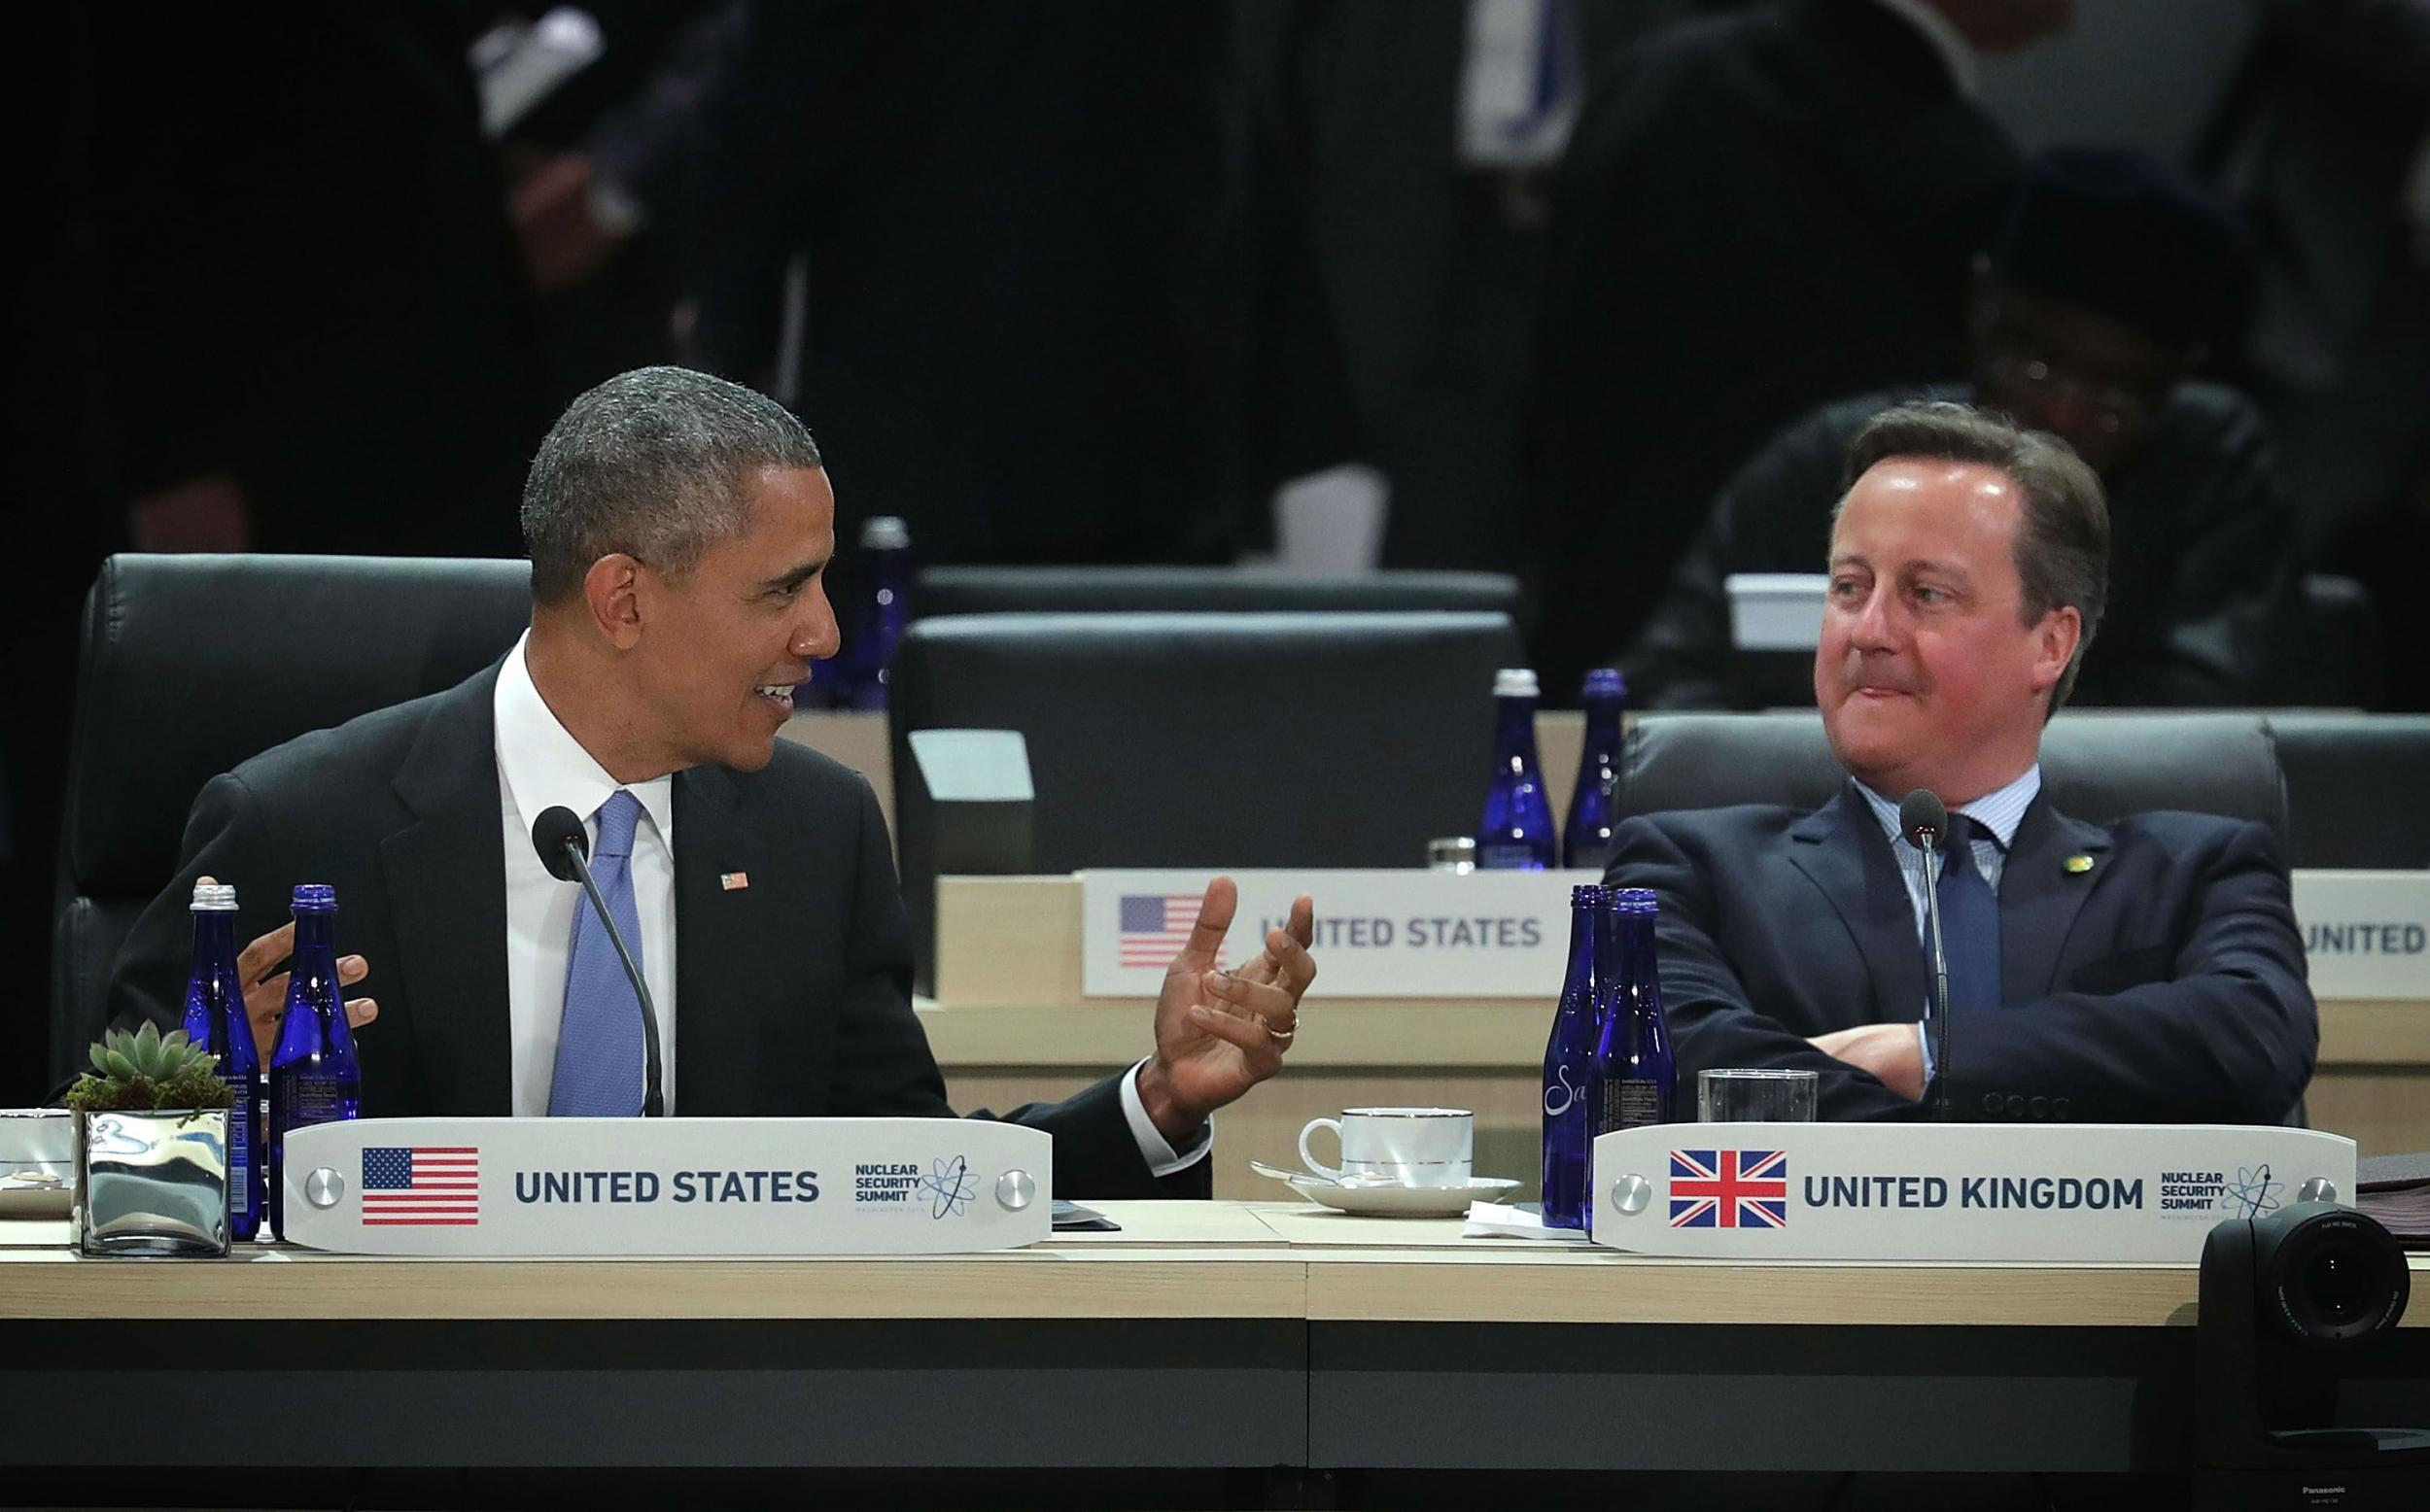 Mr Obama and Mr Cameron chatting together at the Washington DC Nuclear Summit in April